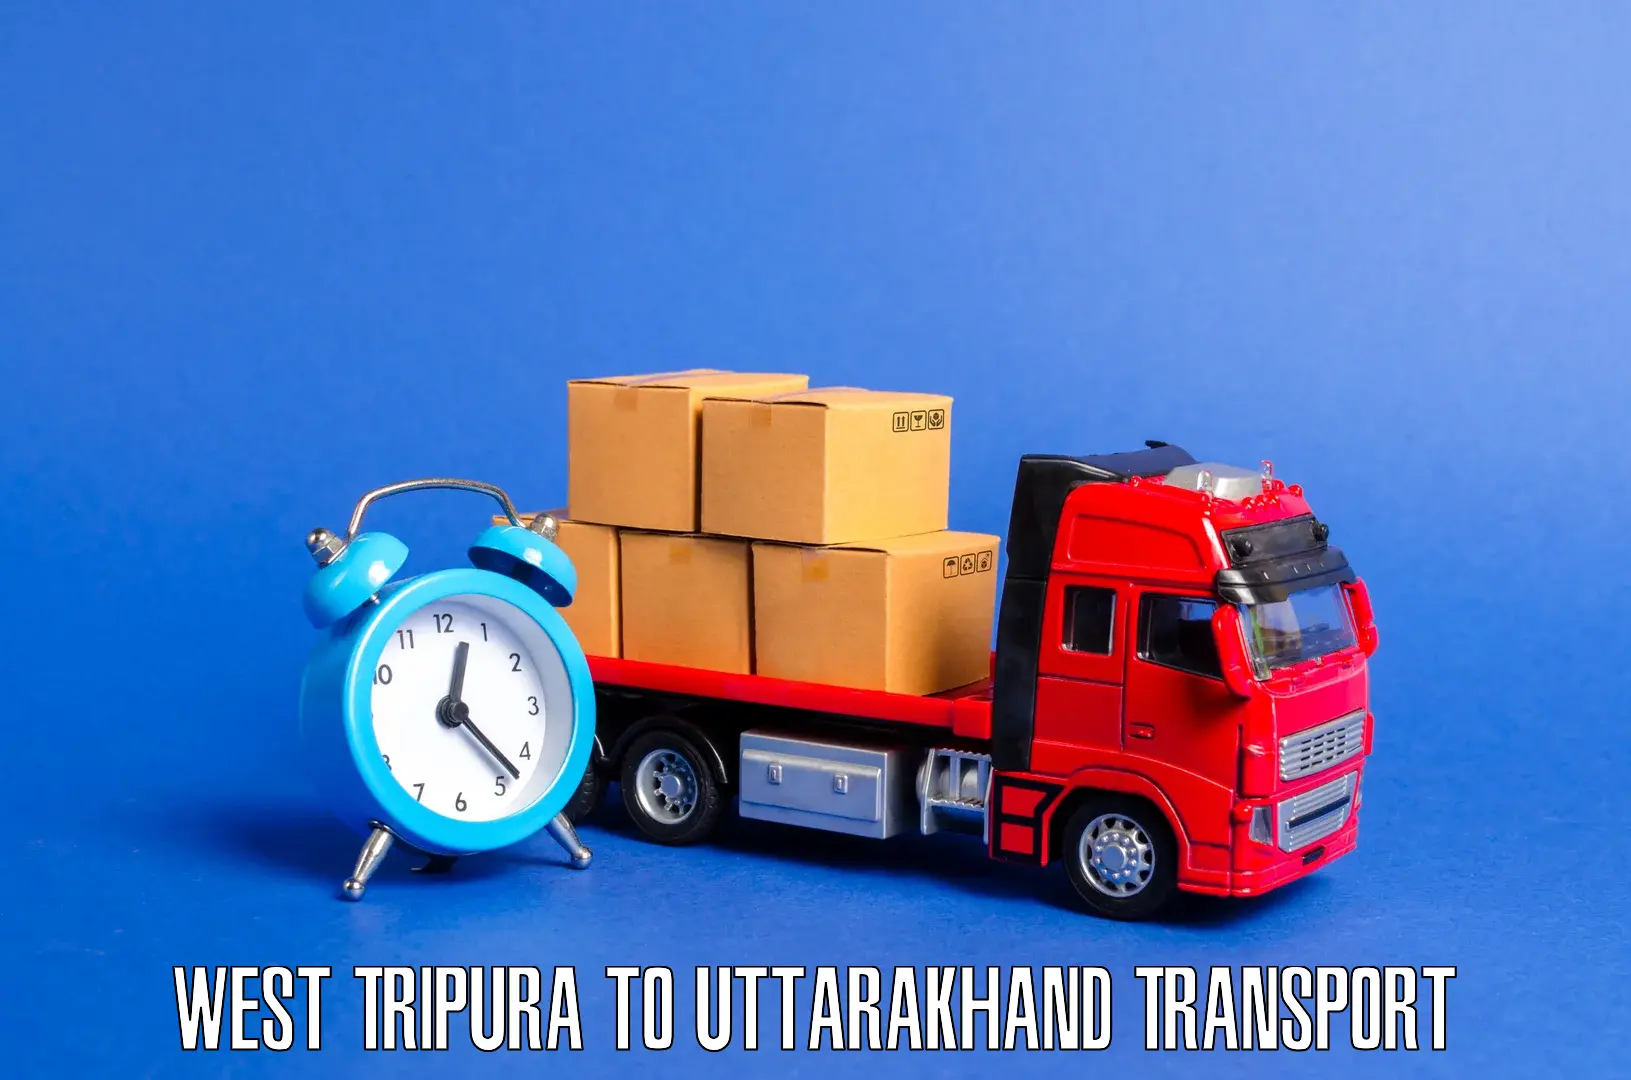 Daily parcel service transport in West Tripura to Baijnath Bageshwar